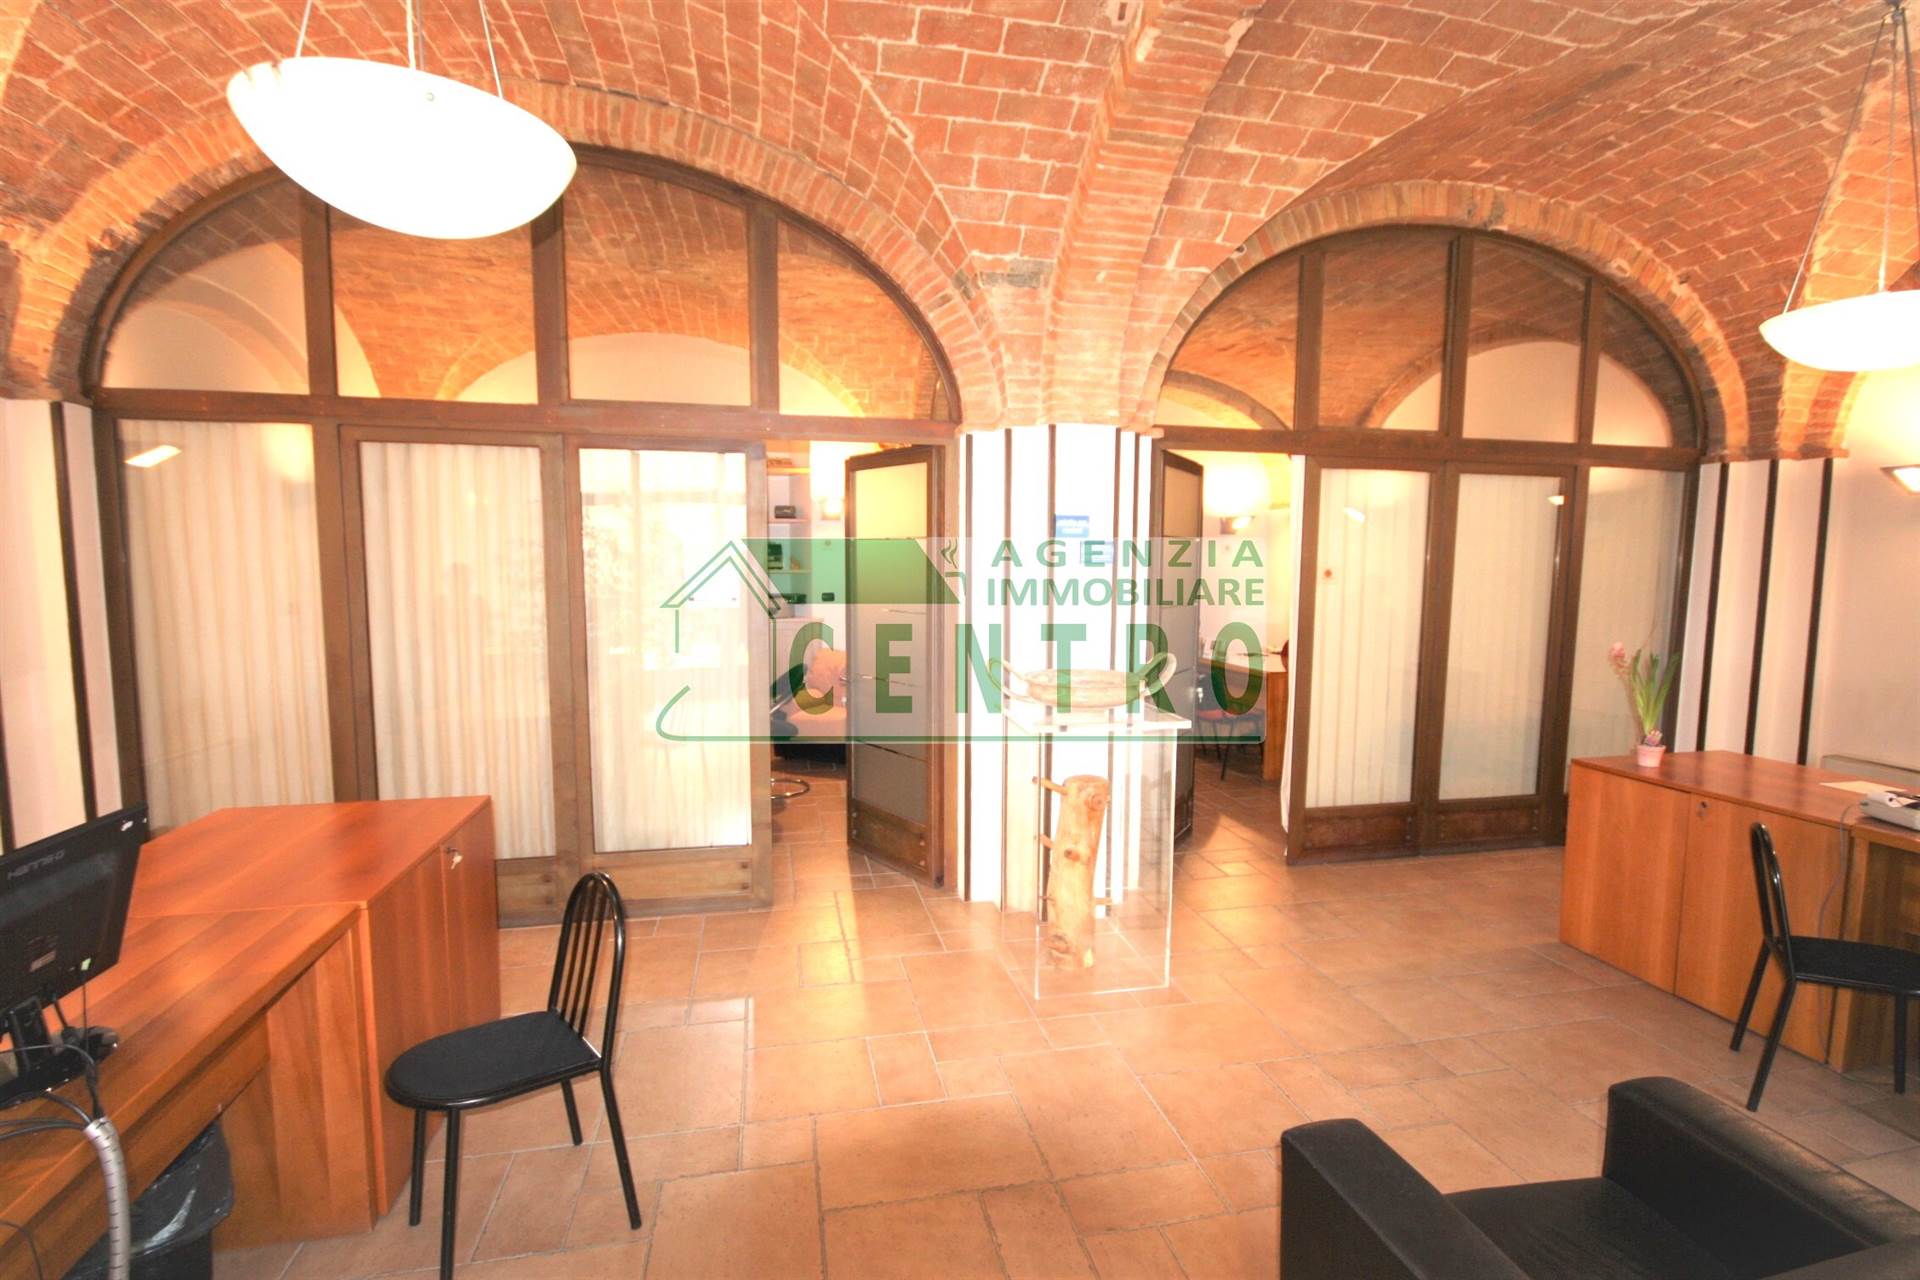 POGGIBONSI, Commercial property for rent of 300 Sq. mt., Restored, Heating Individual heating system, Energetic class: B, Epi: 94 kwh/m3 year, placed 